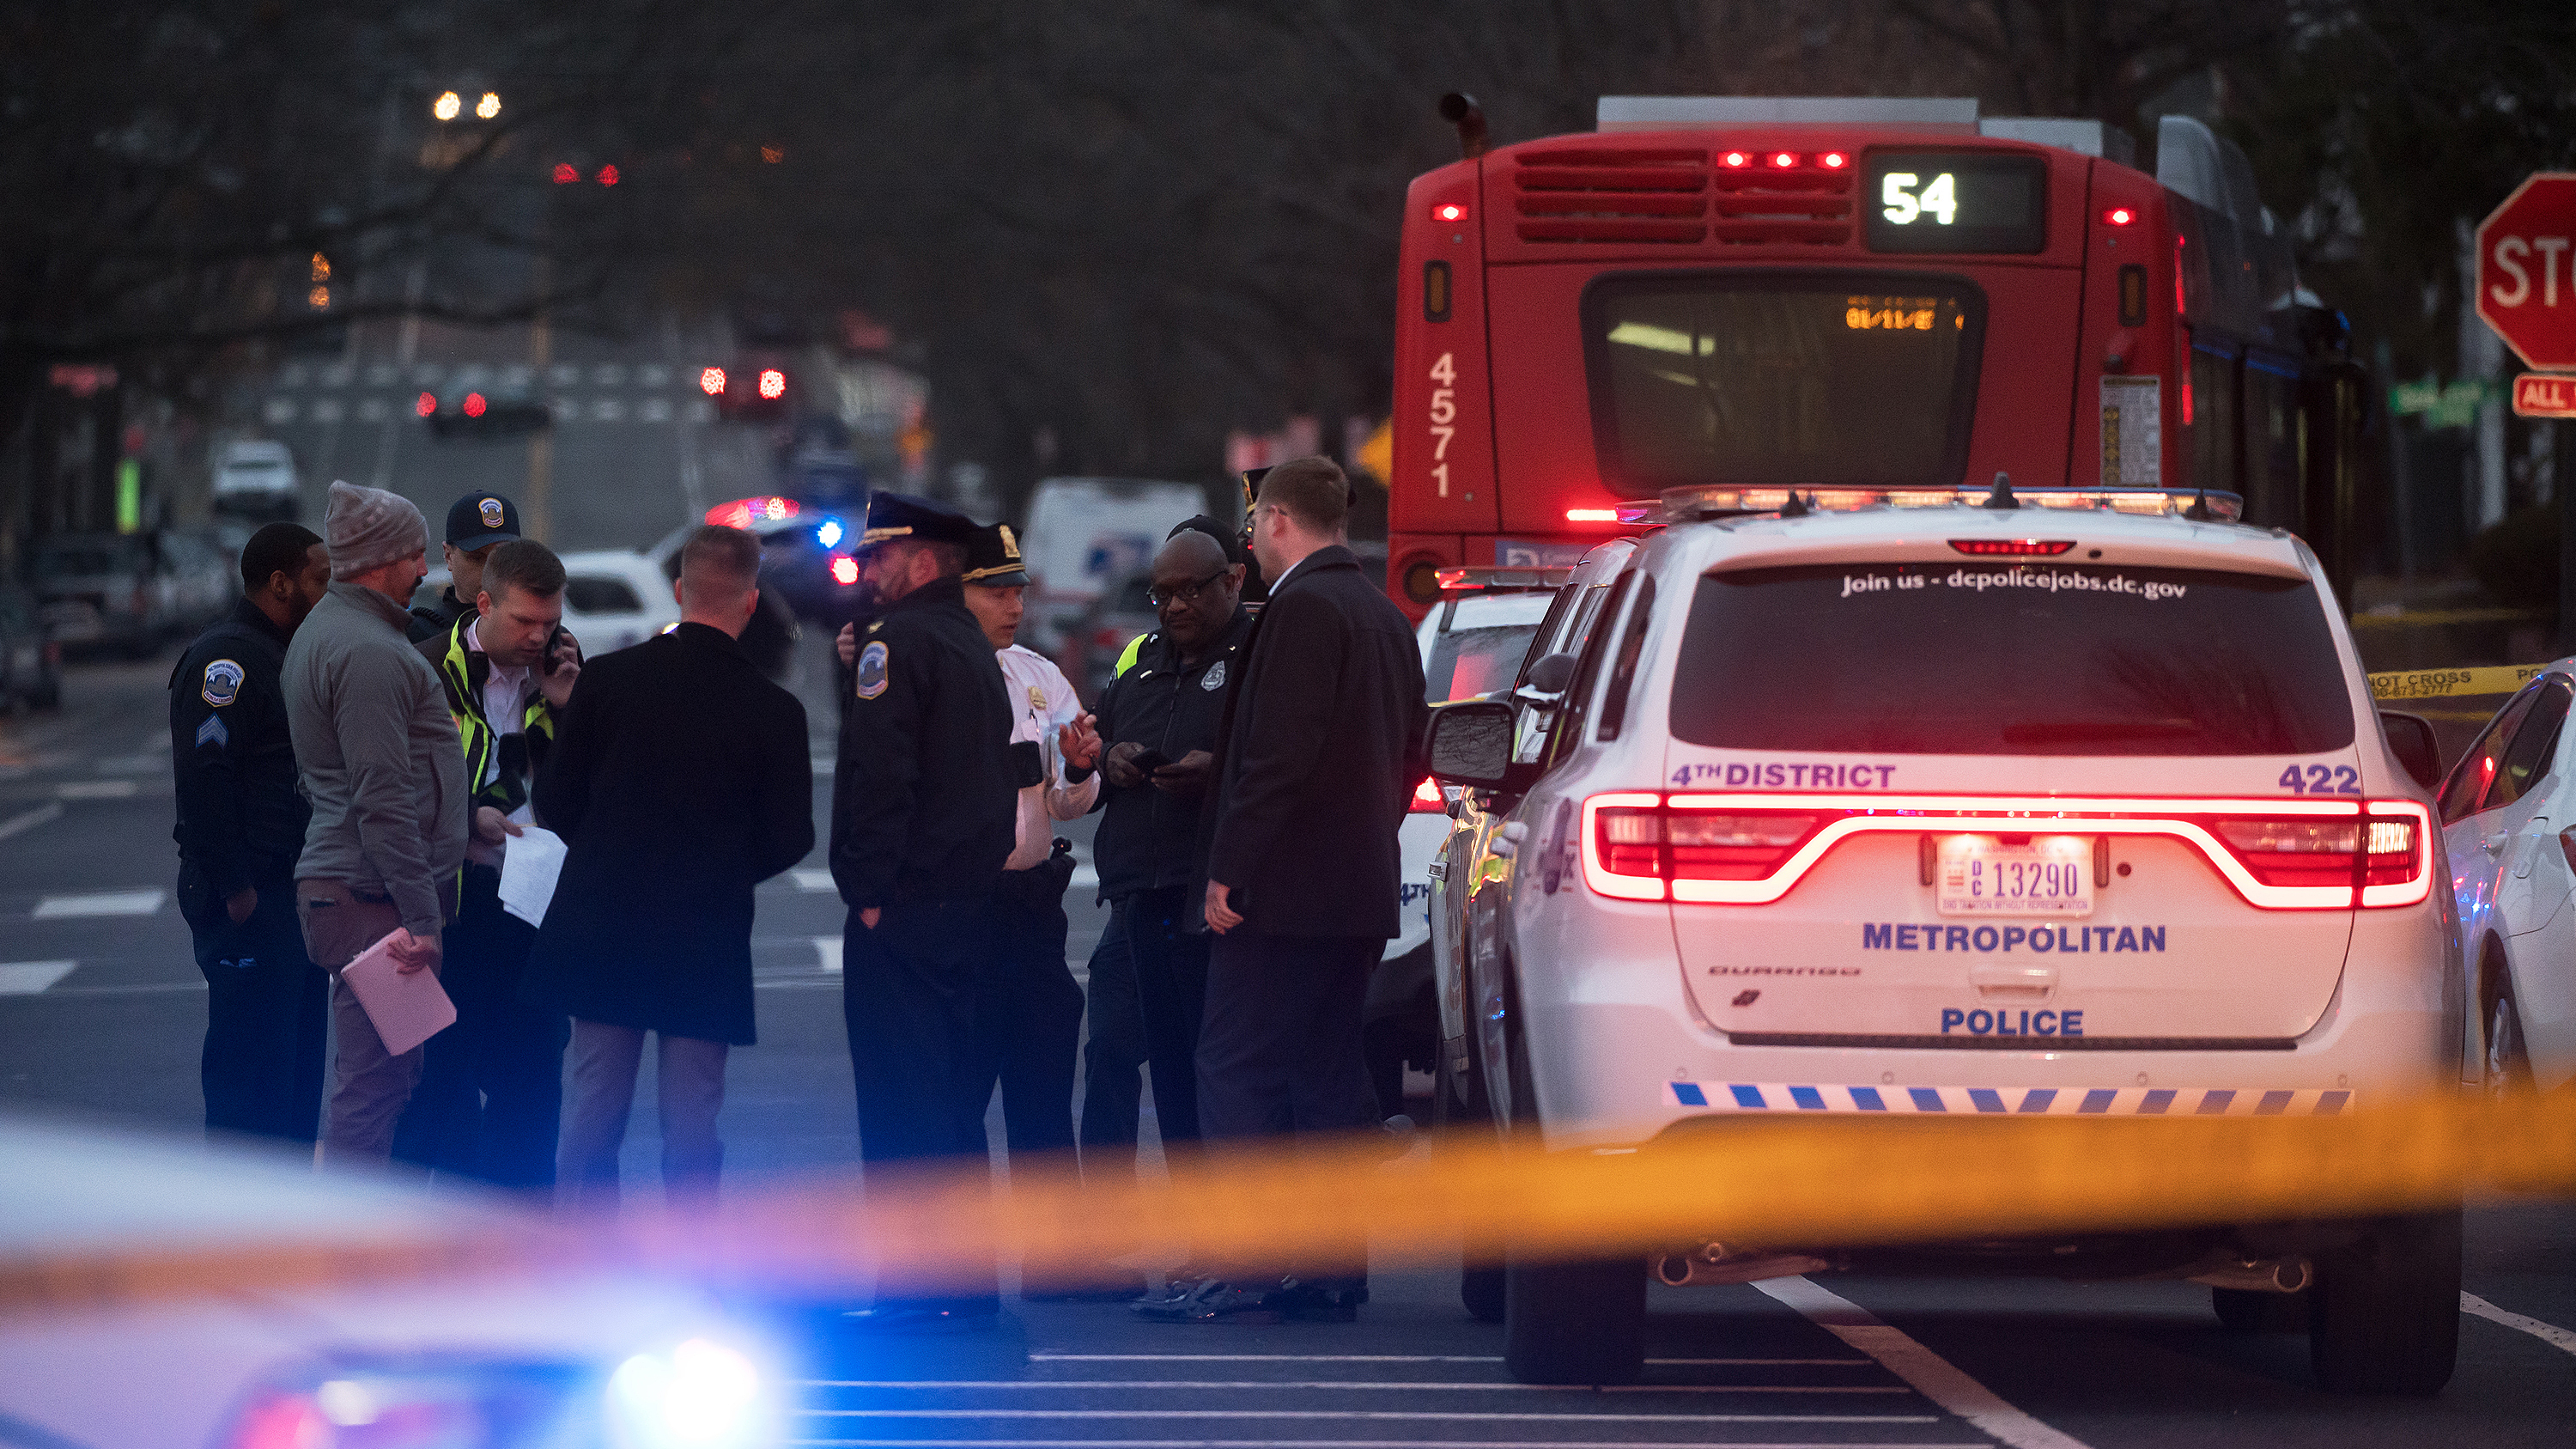 Police at the scene of a shooting on a metro bus in Washington, D.C., the United States, January 11, 2023. /CFP